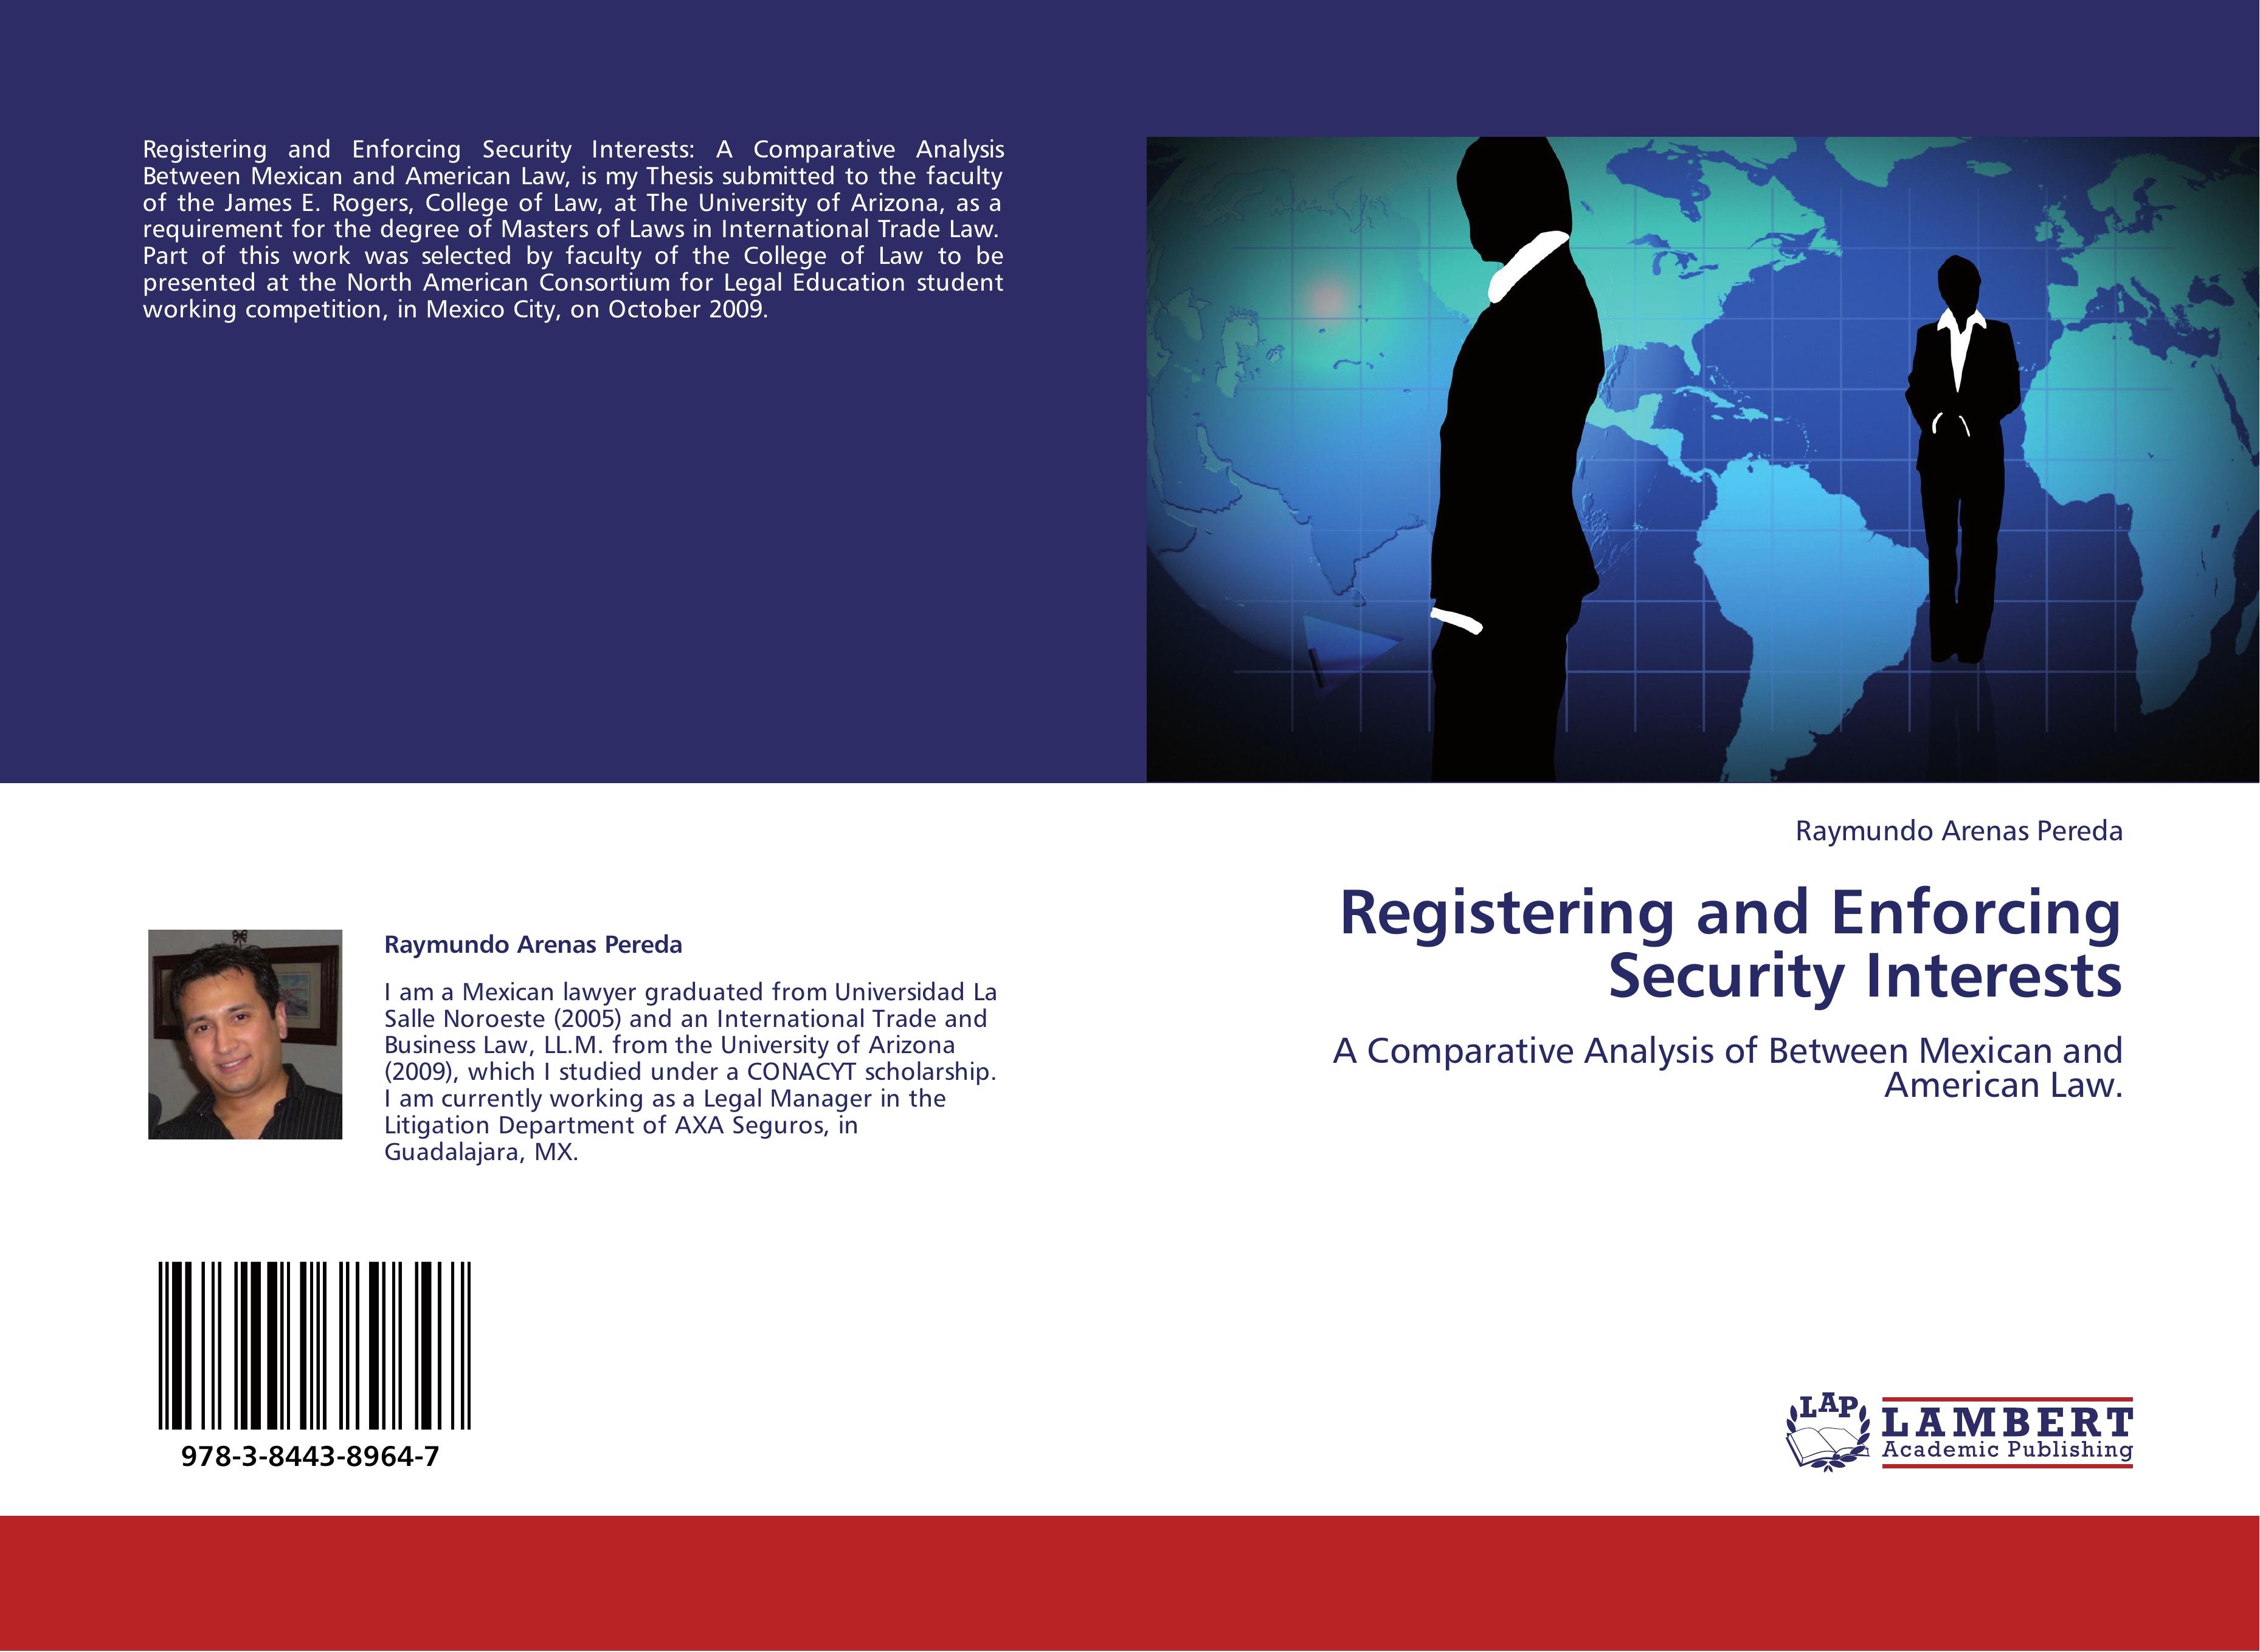 Registering and Enforcing Security Interests - Raymundo Arenas Pereda